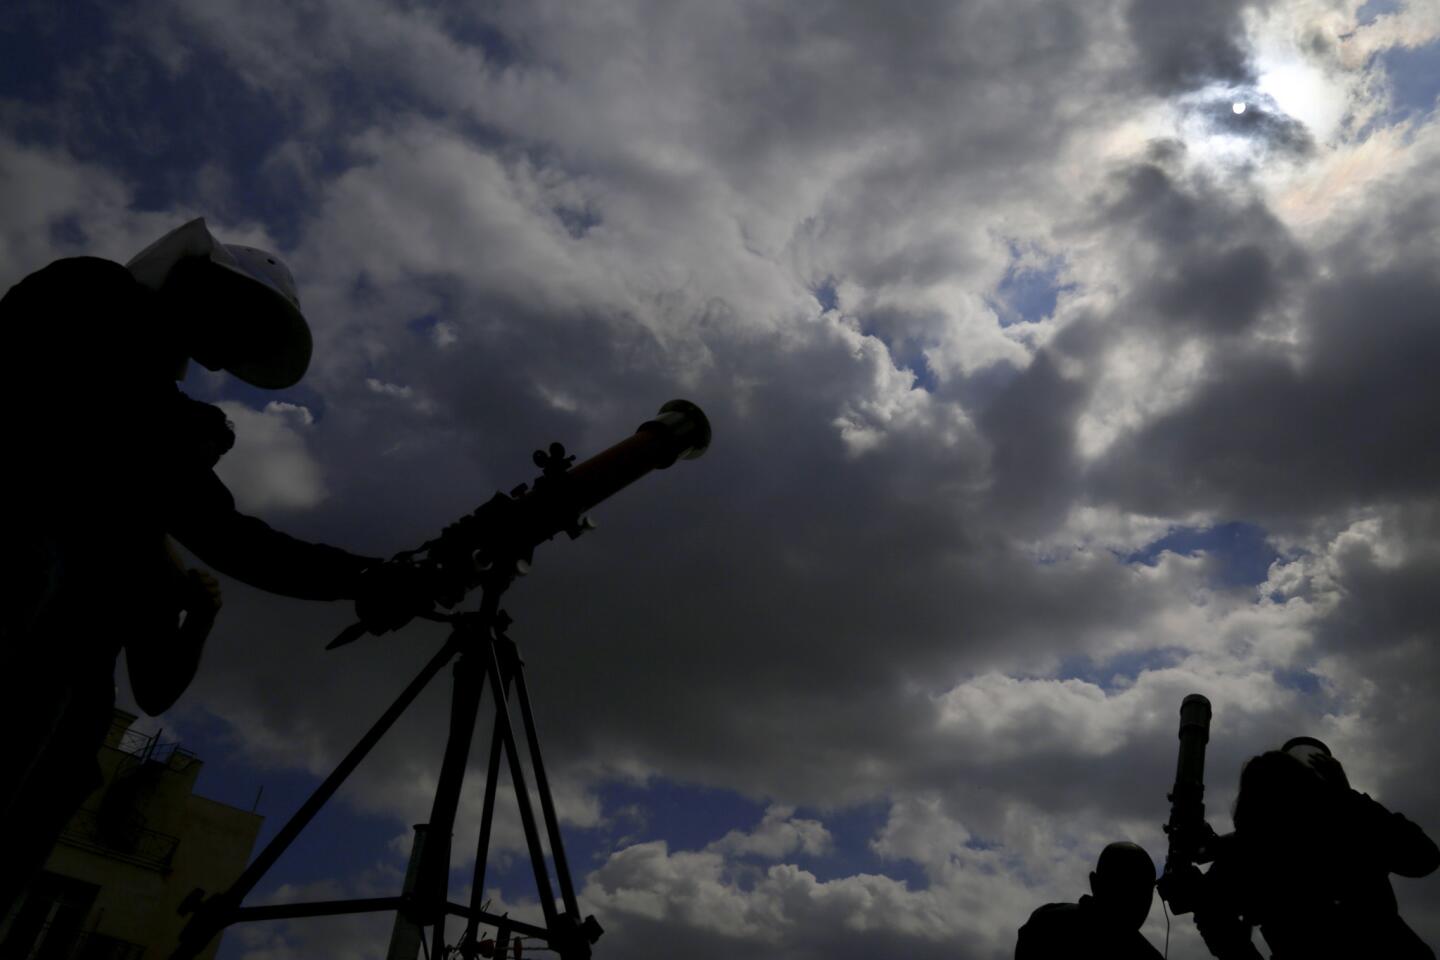 People set up telescopes as they watch an eclipse of the sun in Nicosia, Cyprus, on March 20, 2015.